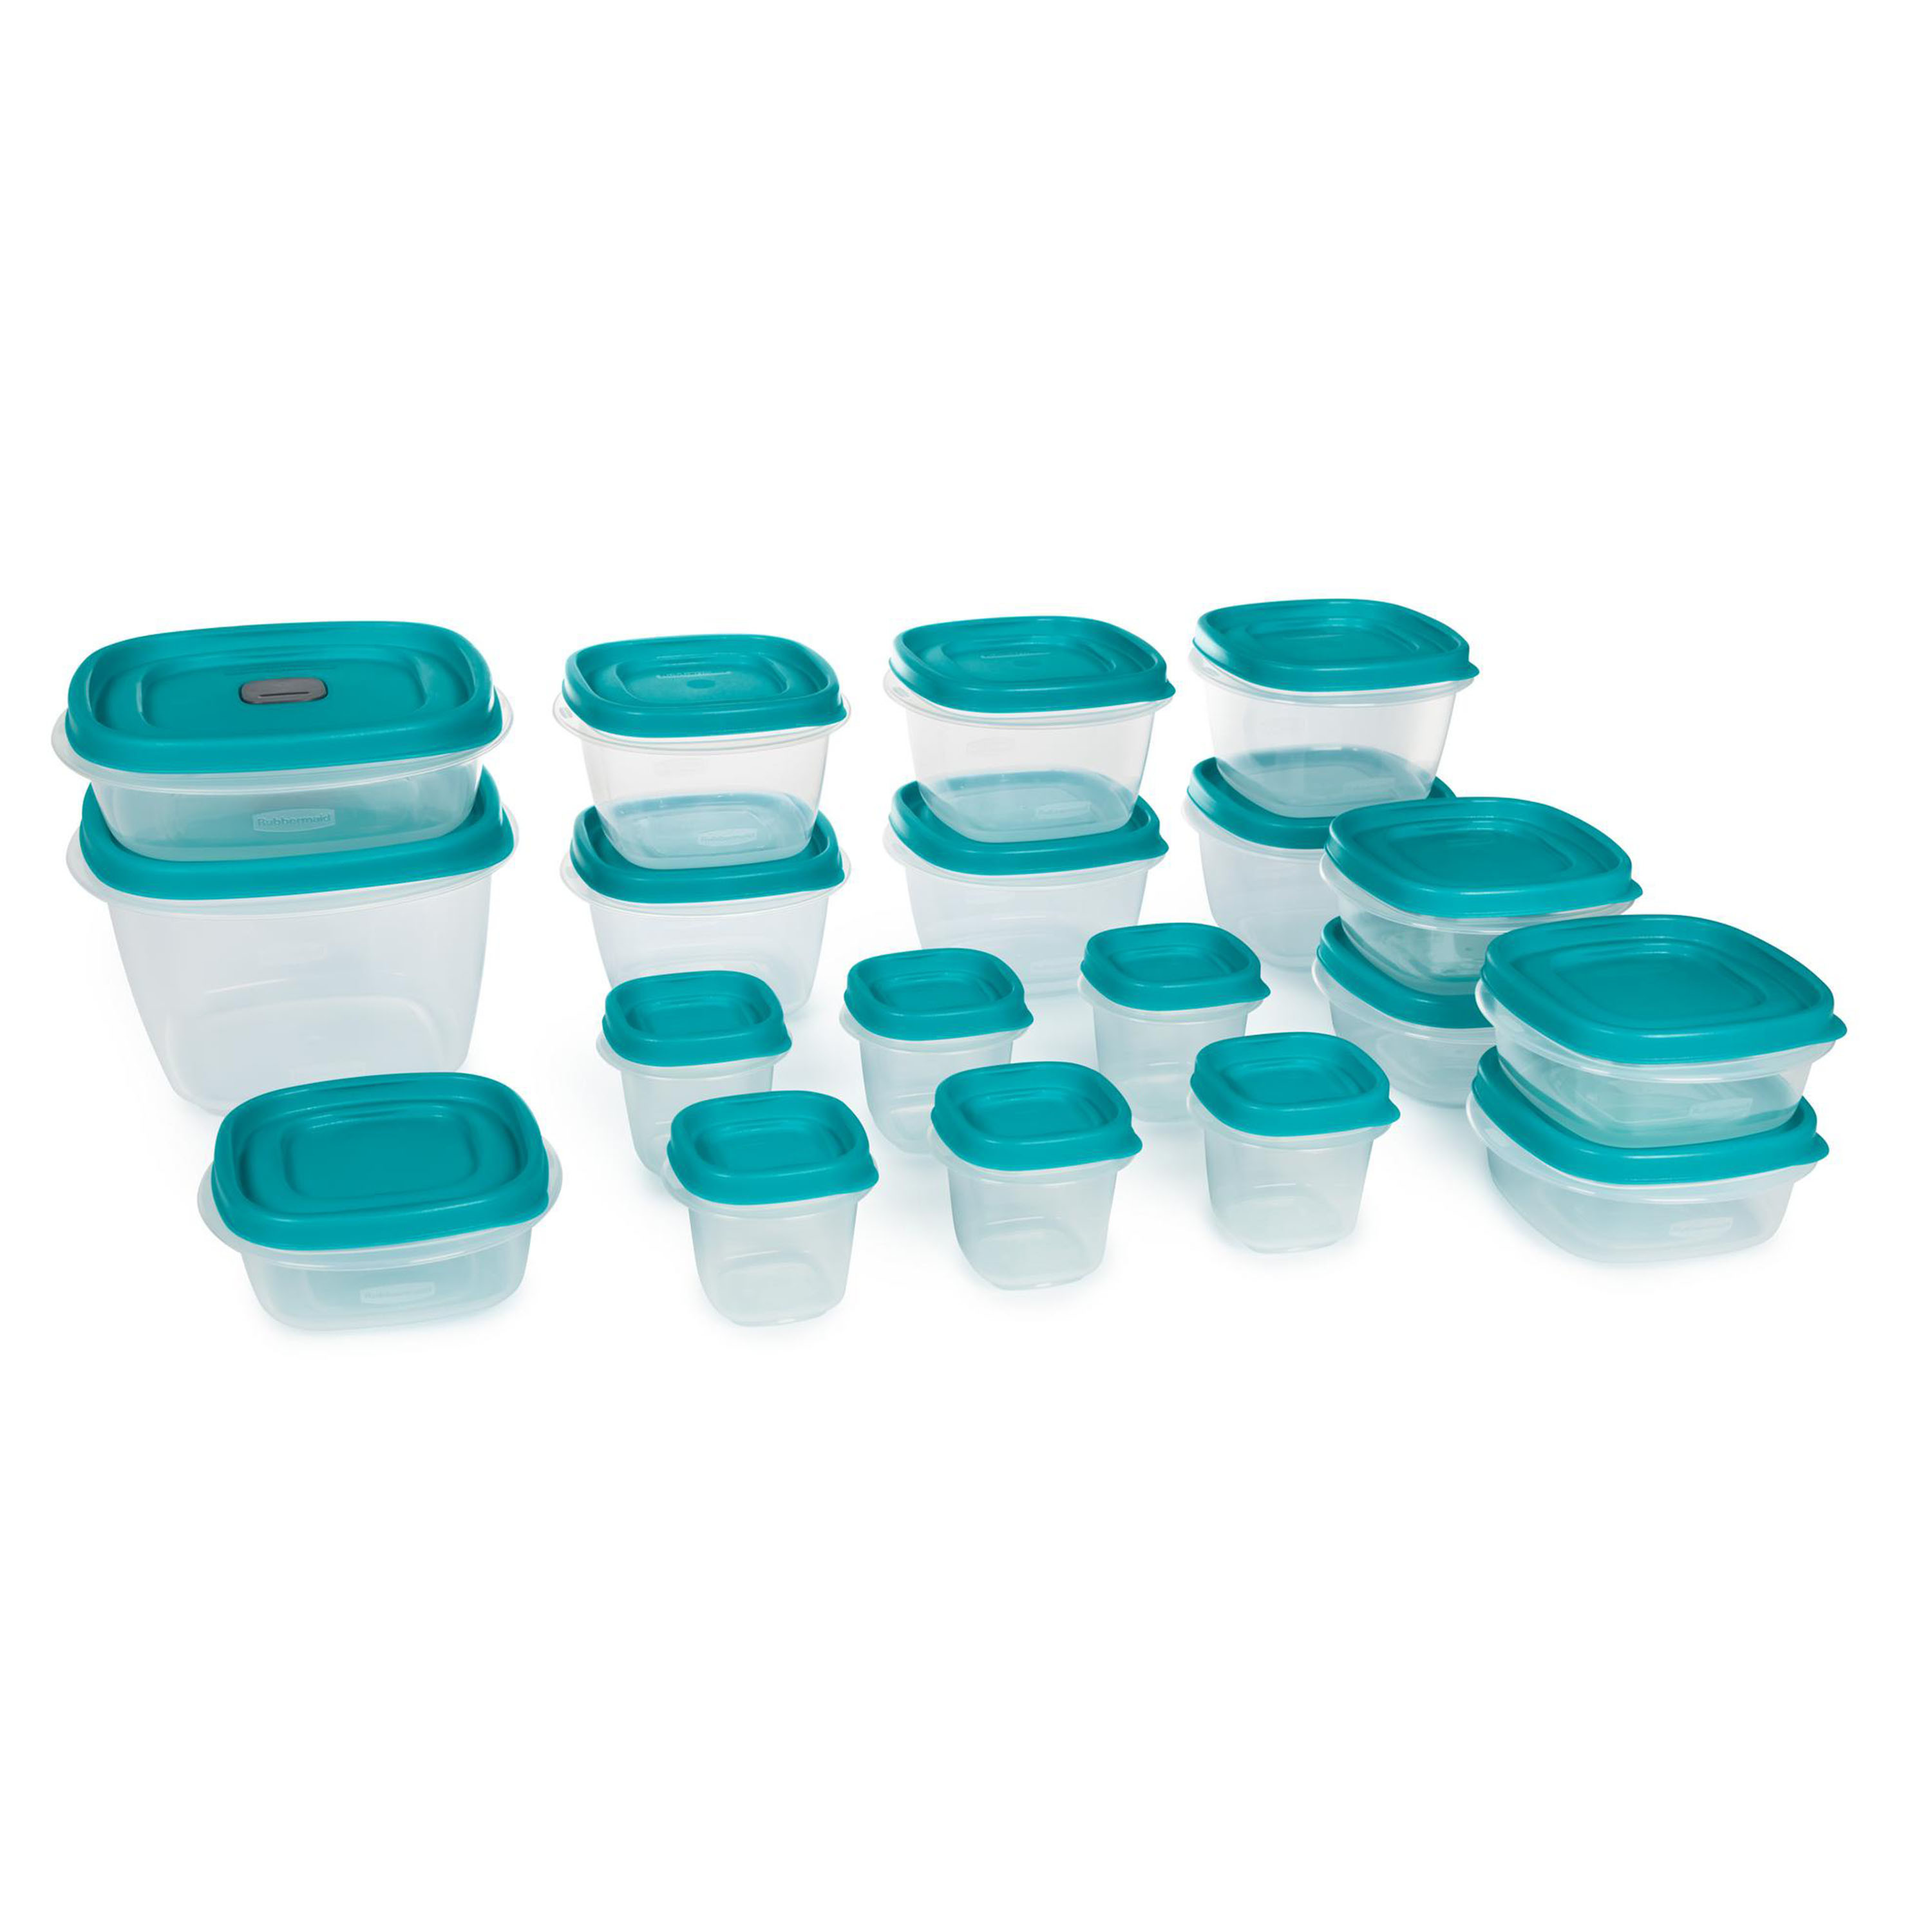 Rubbermaid Easy Find Vented Lids Food Storage Containers, 38-Piece Set, Teal - image 1 of 7